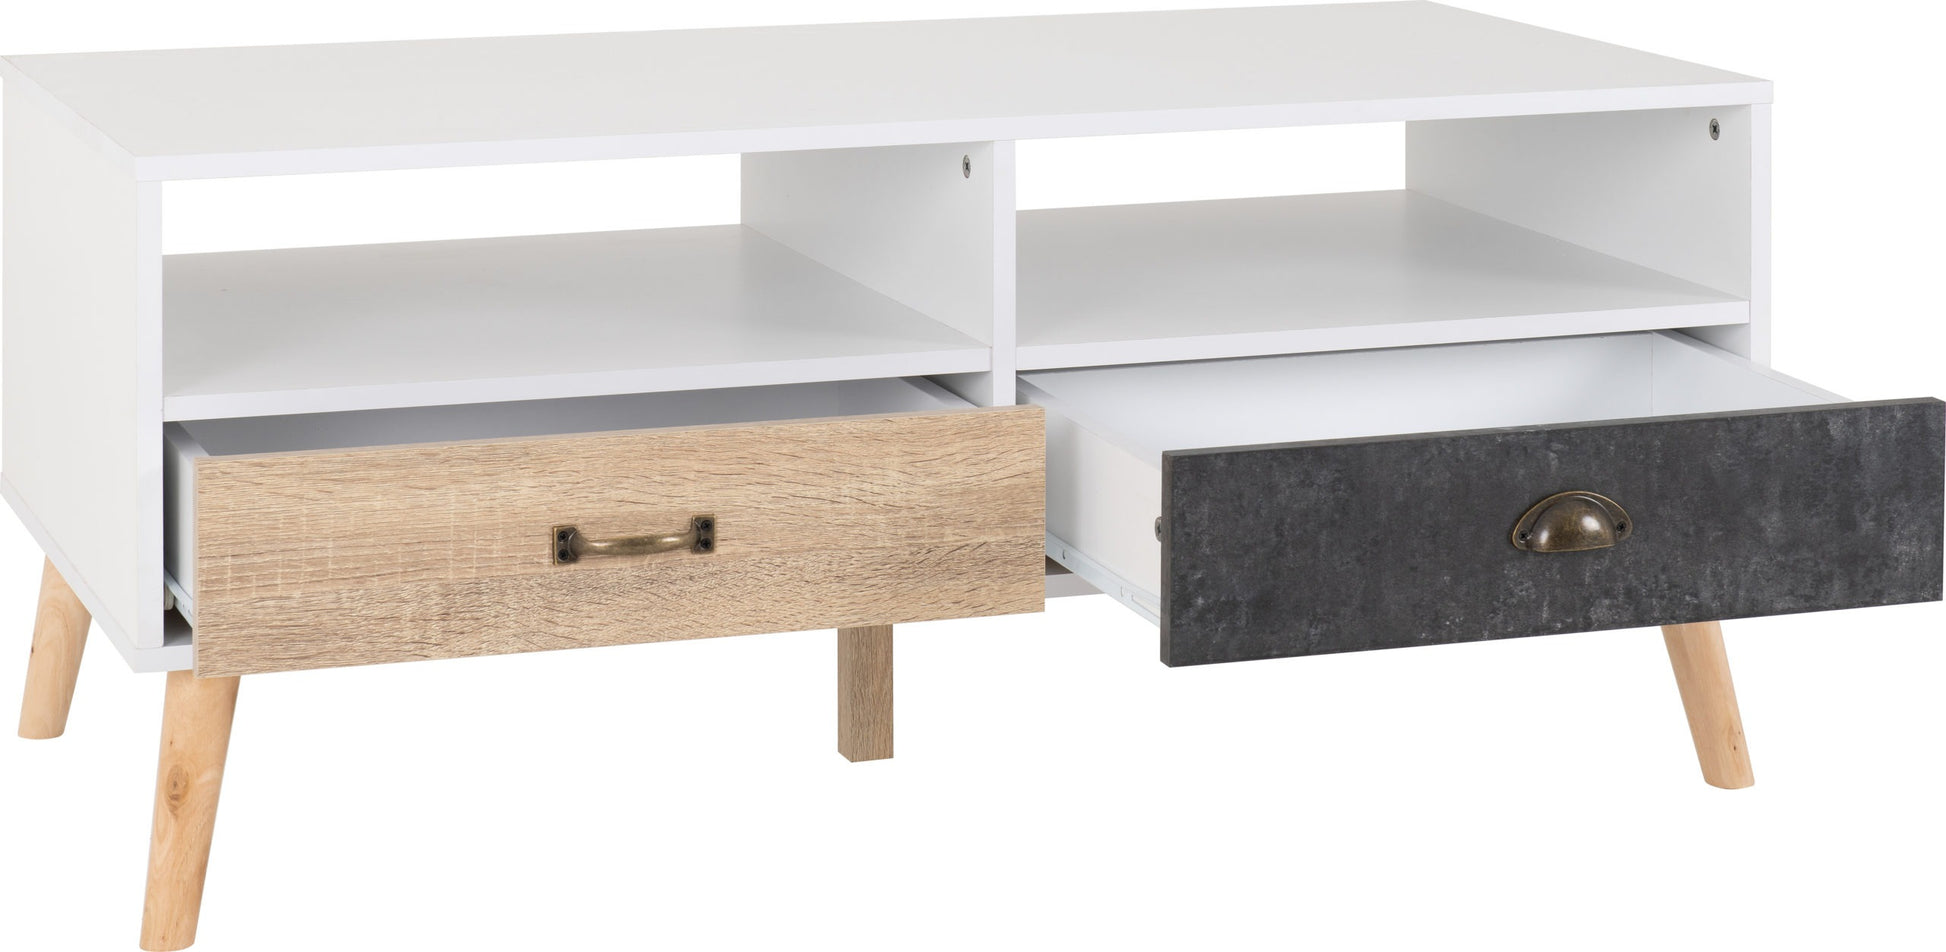 NORDIC-2-DRAWER-COFFEE-TABLE-WHITEDISTRESSED-EFFECT-2021-300-301-058-02-scaled.jpg